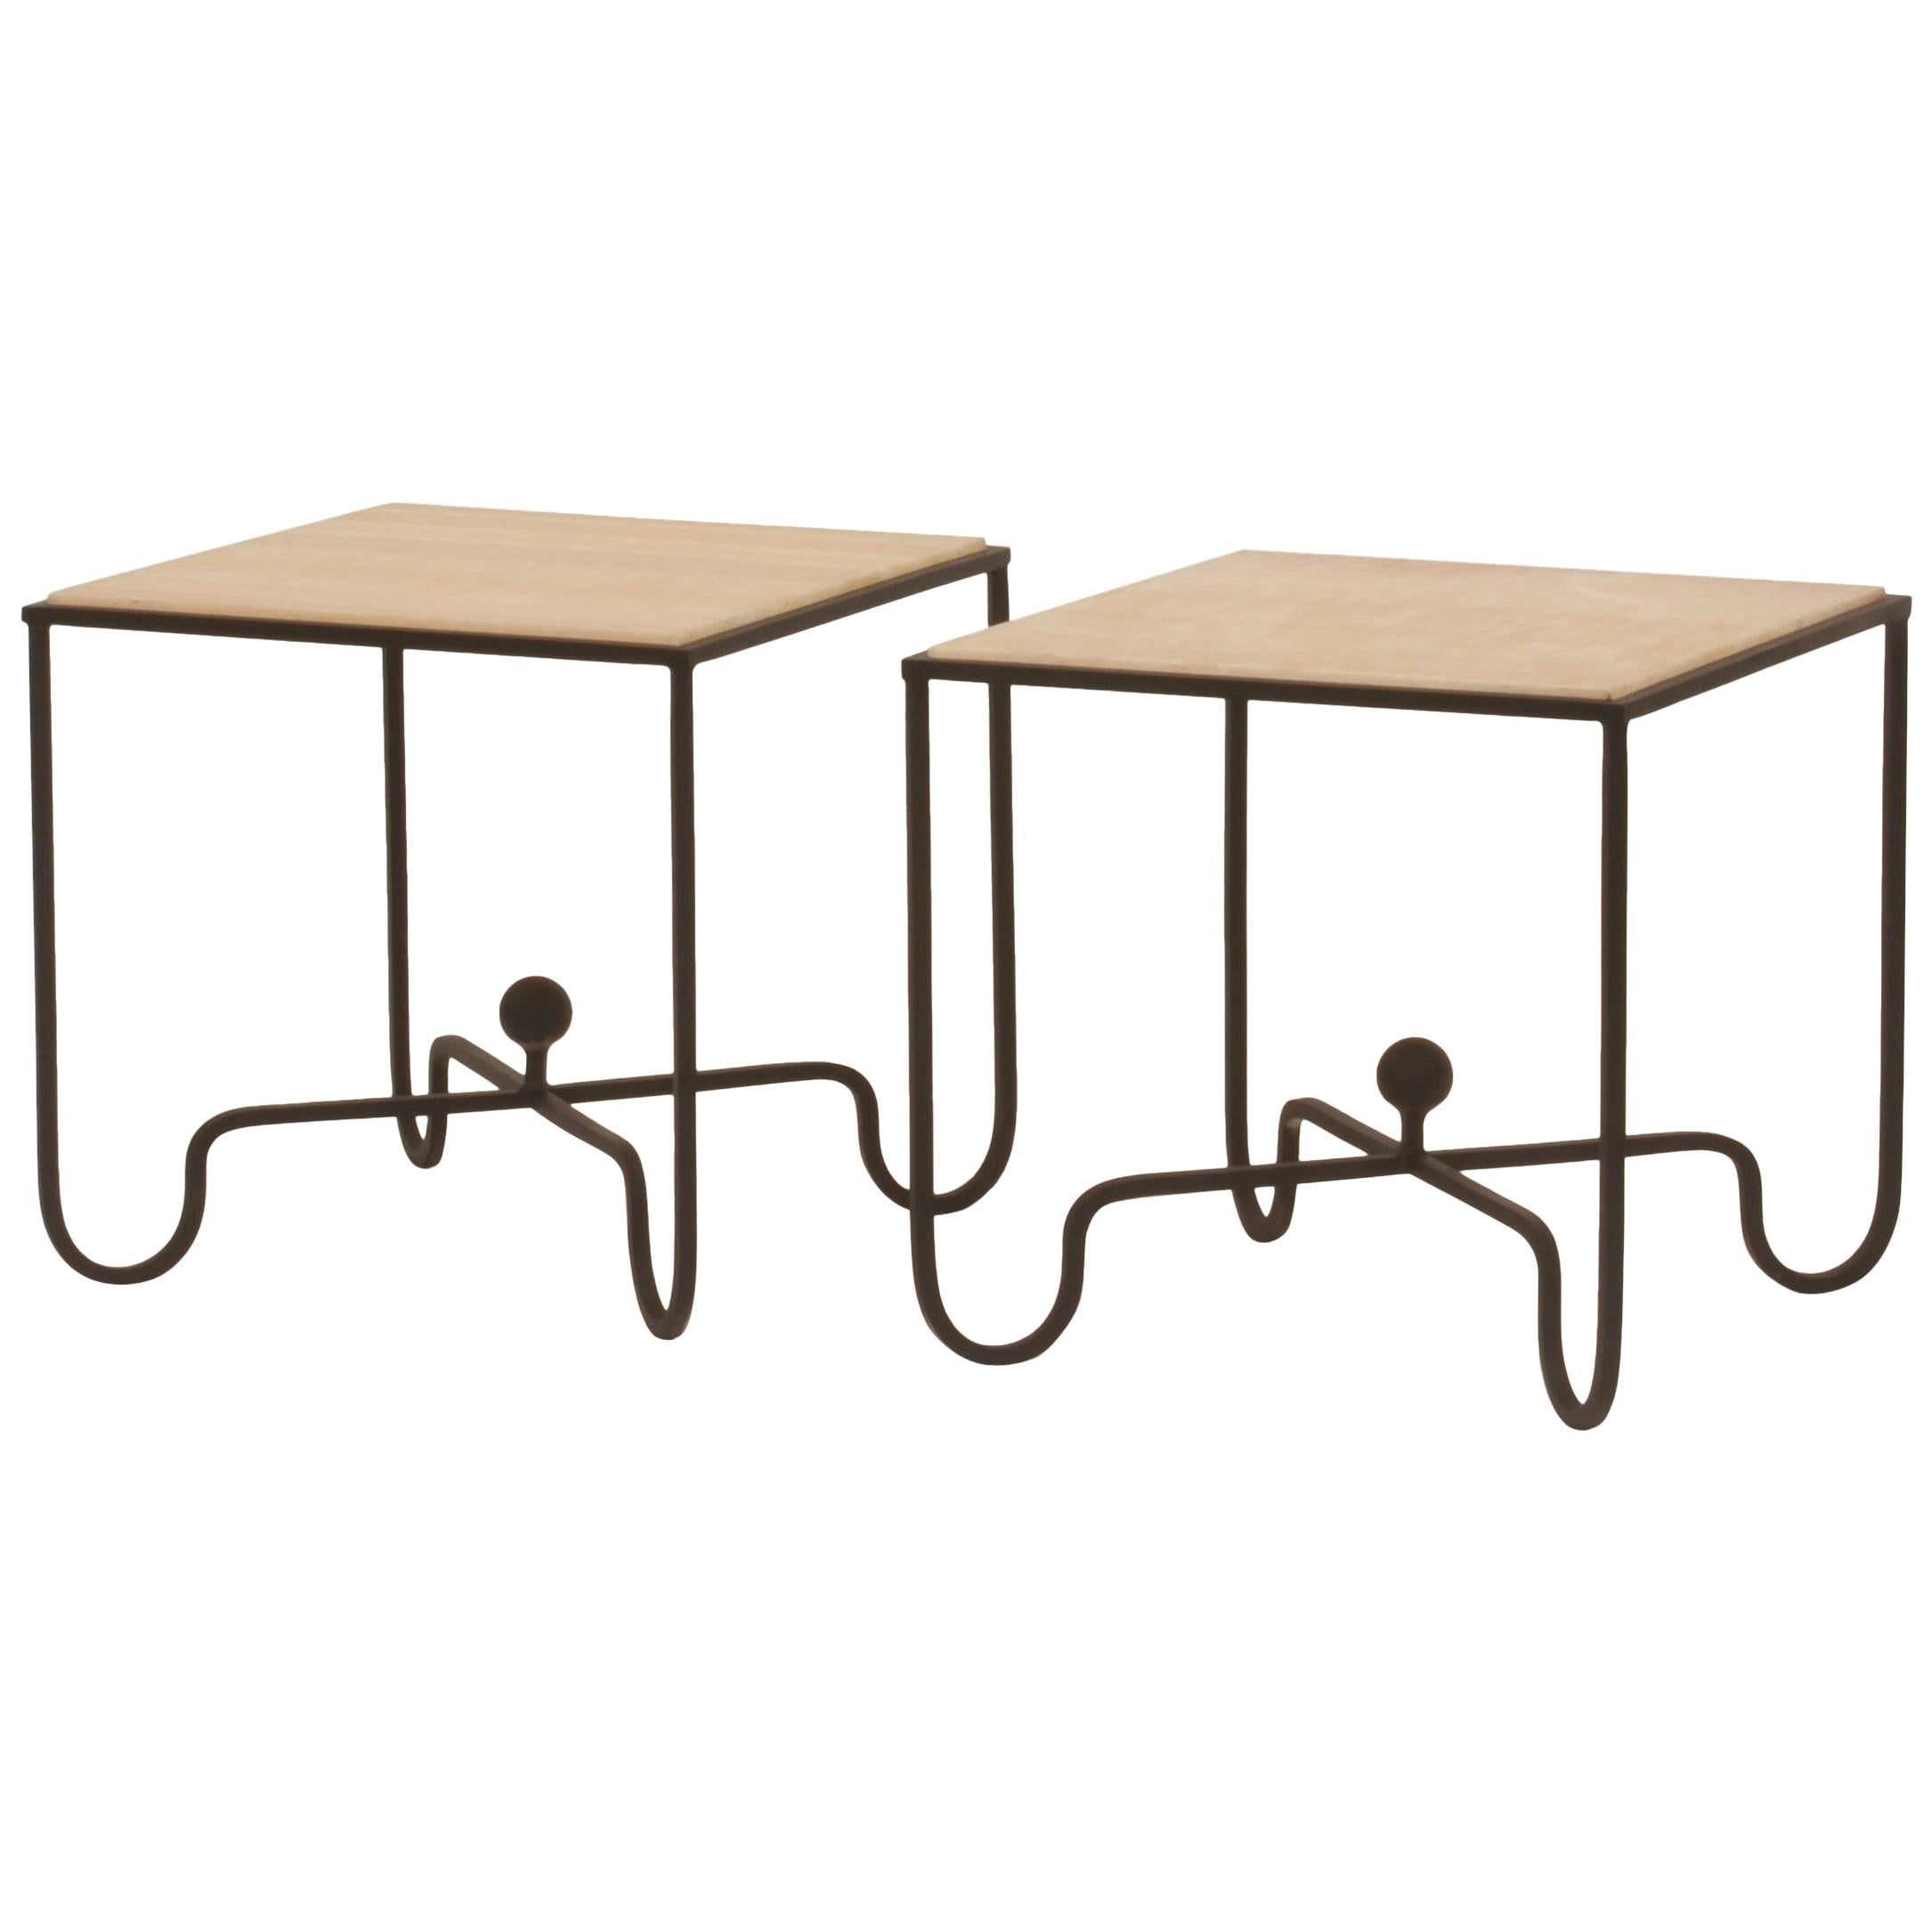 Pair of 'Entretoise' Wrought Iron and Onyx Side Tables by Design Frères For Sale